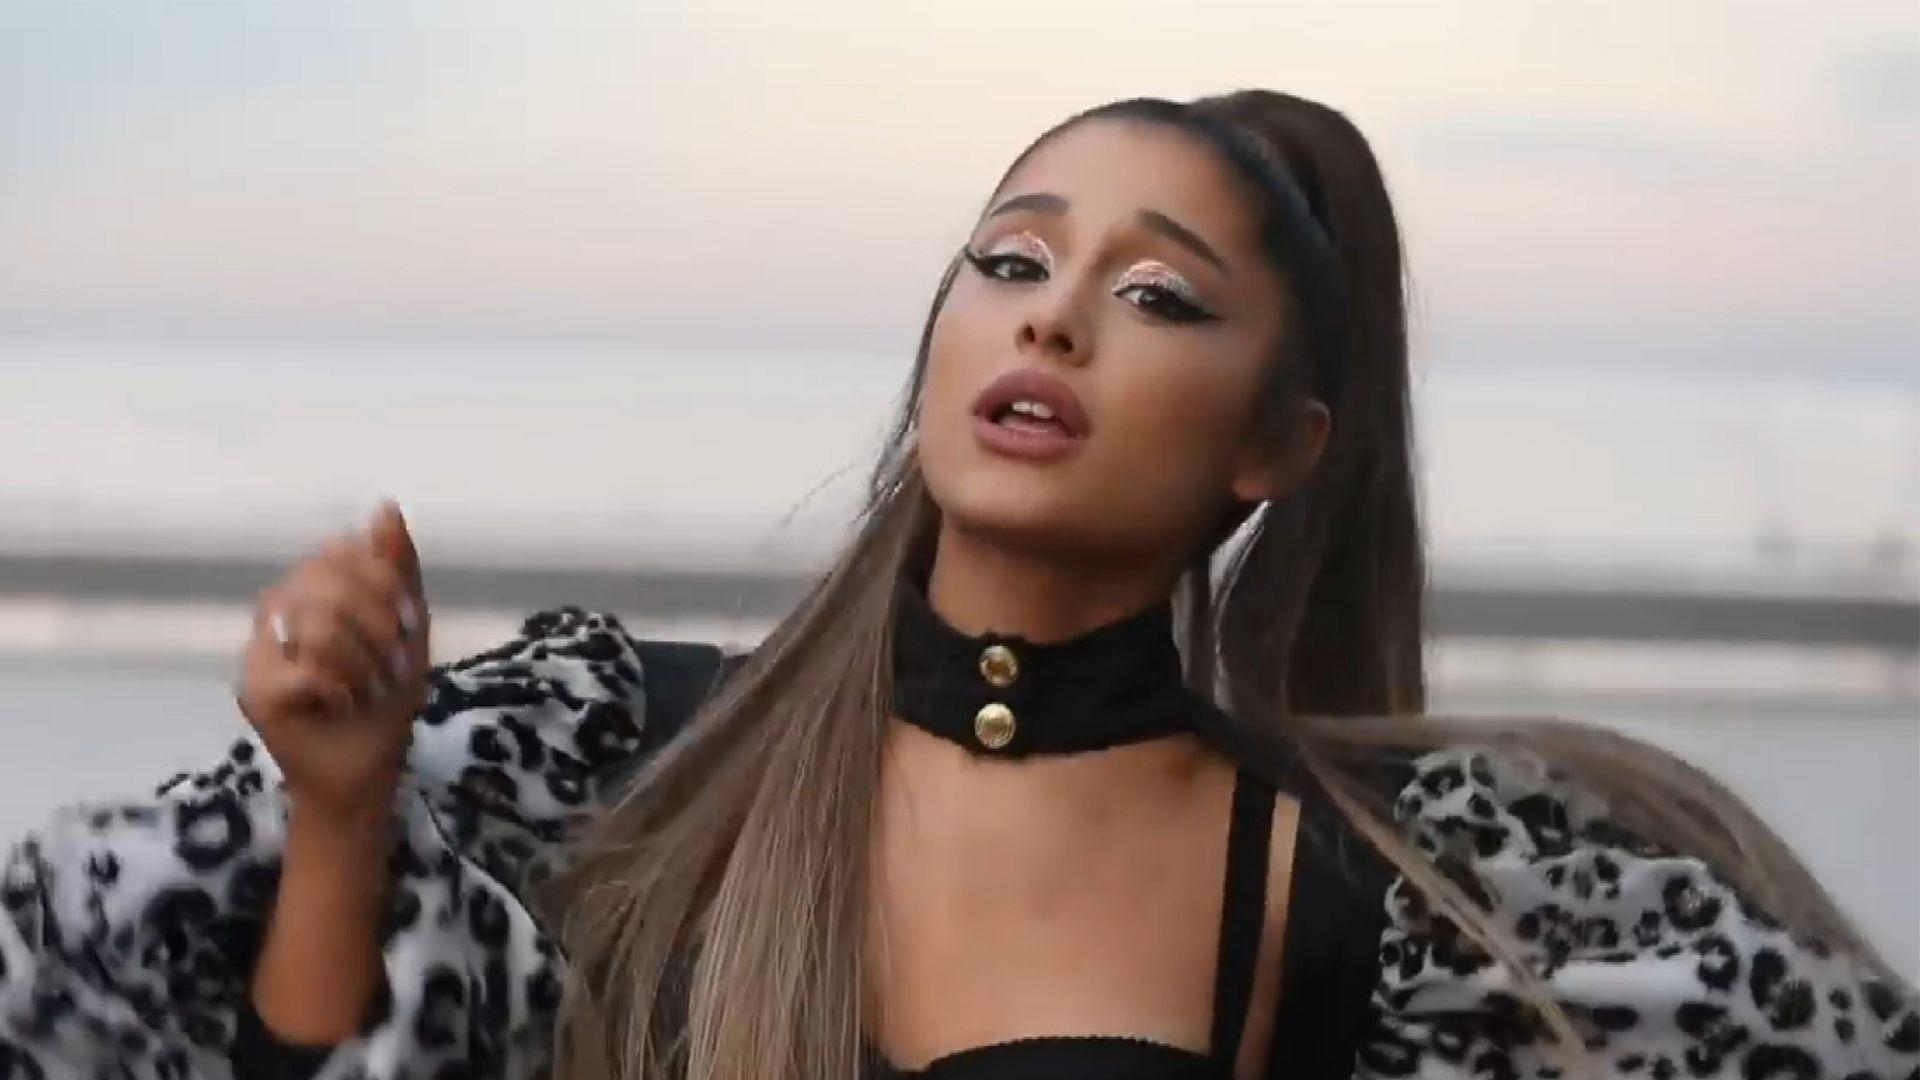 Watch: Ariana Grande’s New Music Video For ‘Monopoly’ Feat Victoria Monet